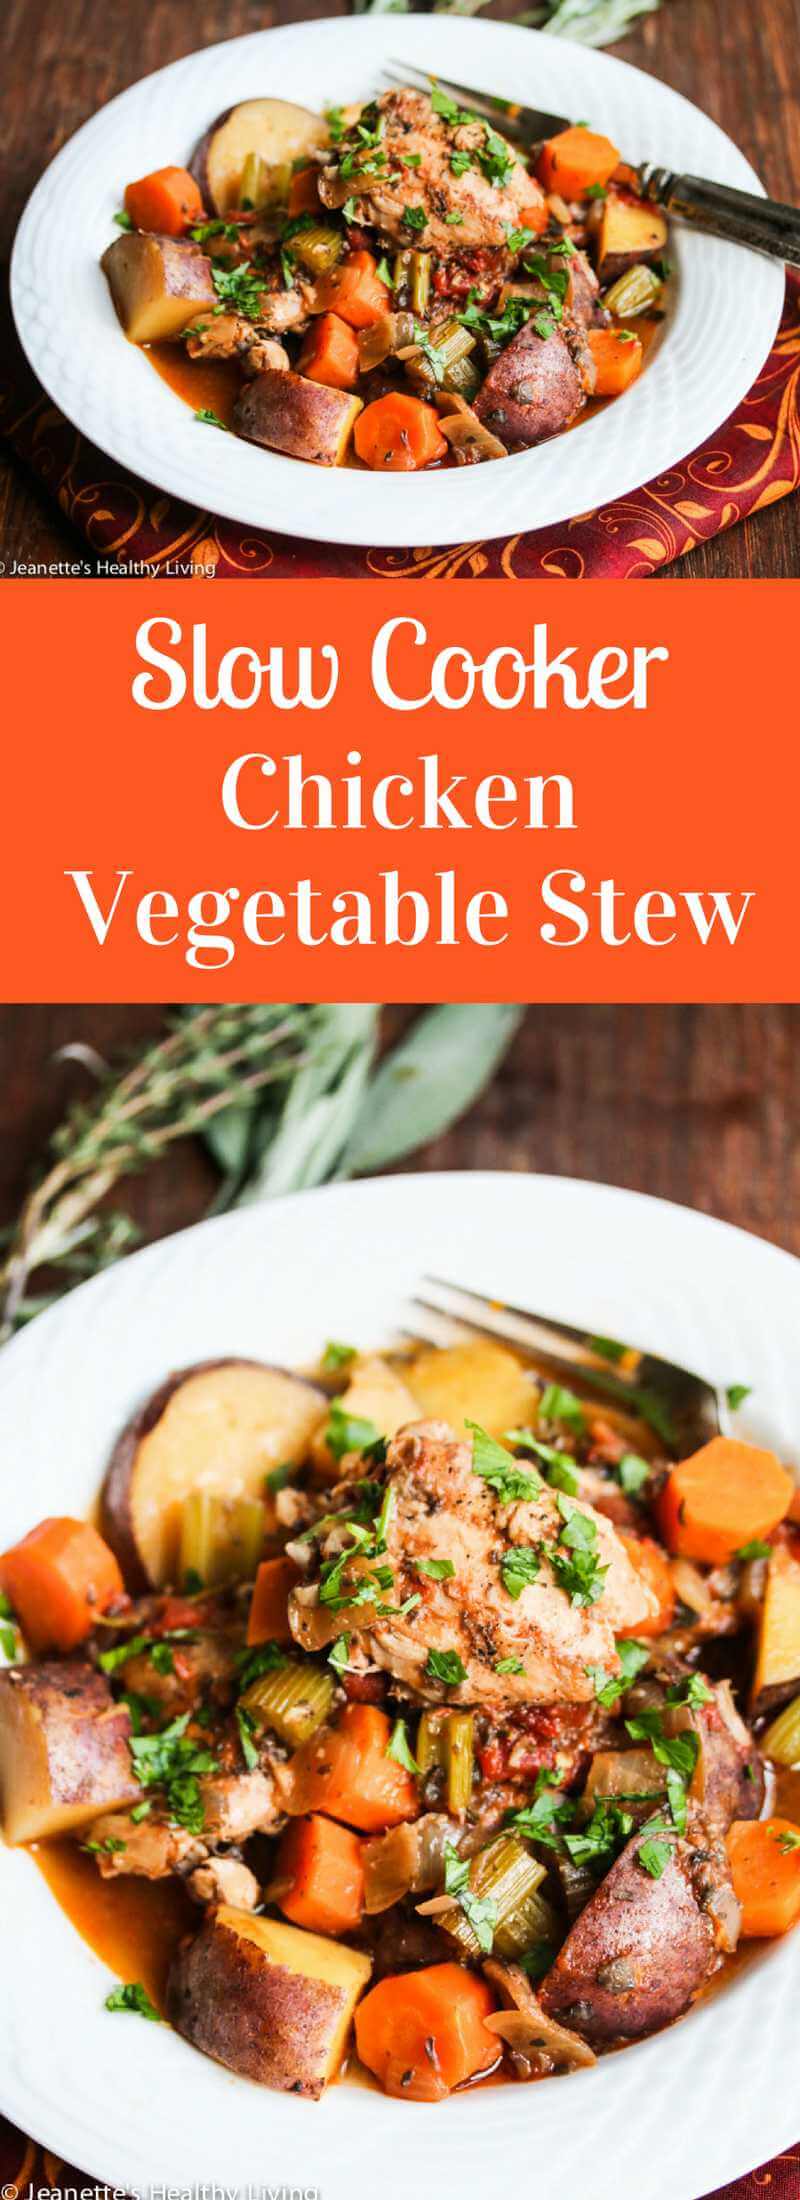 GSlow Cooker Chicken Vegetable Stew Recipe - learn what vegetables, herbs and spices go well in chicken stew, and how to make a healthy chicken stew ~ https://jeanetteshealthyliving.com